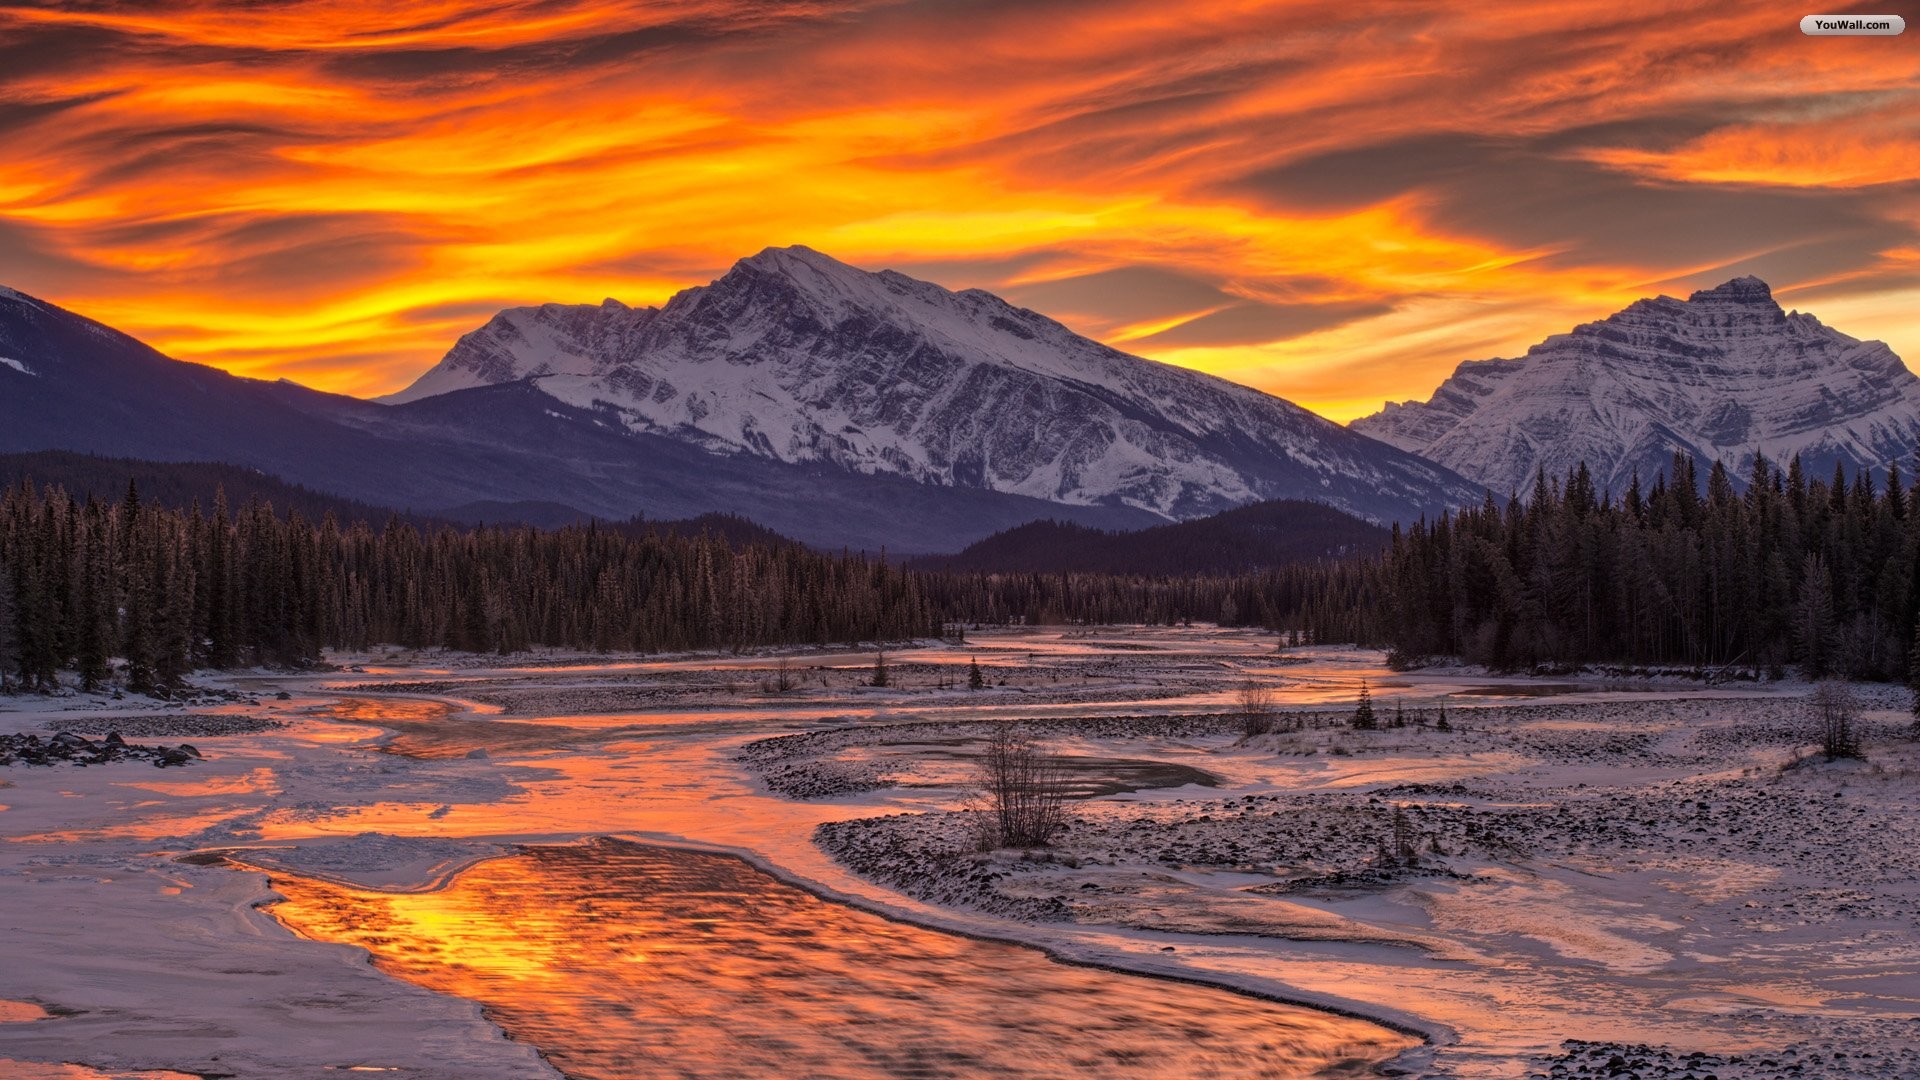 1920x1080 Denver Mountains Sunset. Wallpaper of sunset over snowy mountains